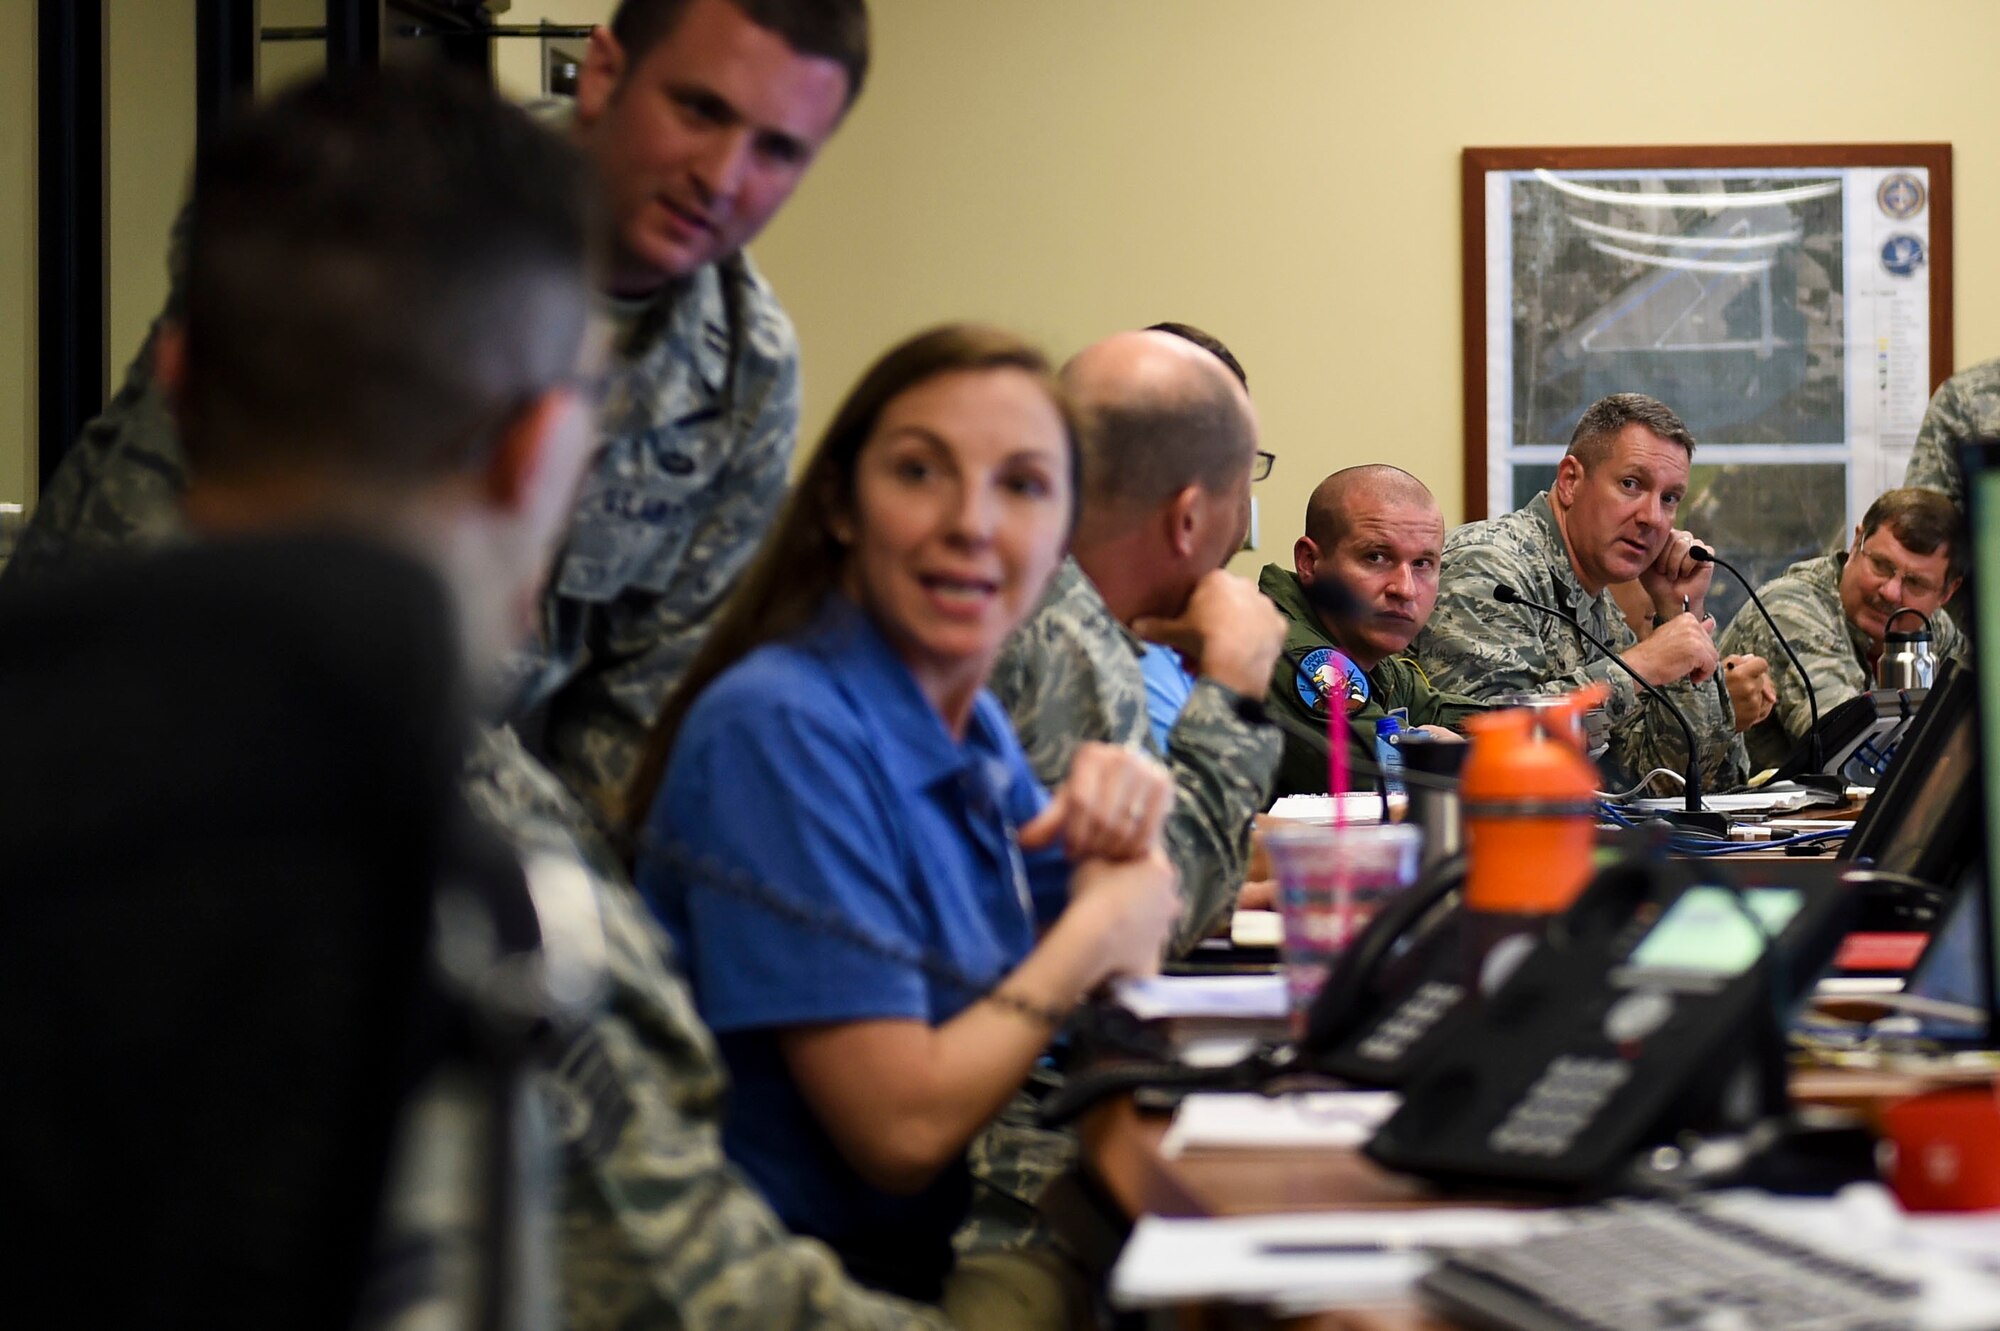 U.S. Air Force Col. Robert Lyman, Joint Base Charleston commander, discusses current and ongoing operations at the Emergency Operations Center during Hurricane Condition I for Hurricane Matthew on Joint Base Charleston, S.C., Oct. 7, 2016. All non-essential personnel evacuated the area, but will return after disaster response coordinators assess damage and verify a safe operating environment. (U.S. Air Force photo by Senior Airman Nicholas Byers)